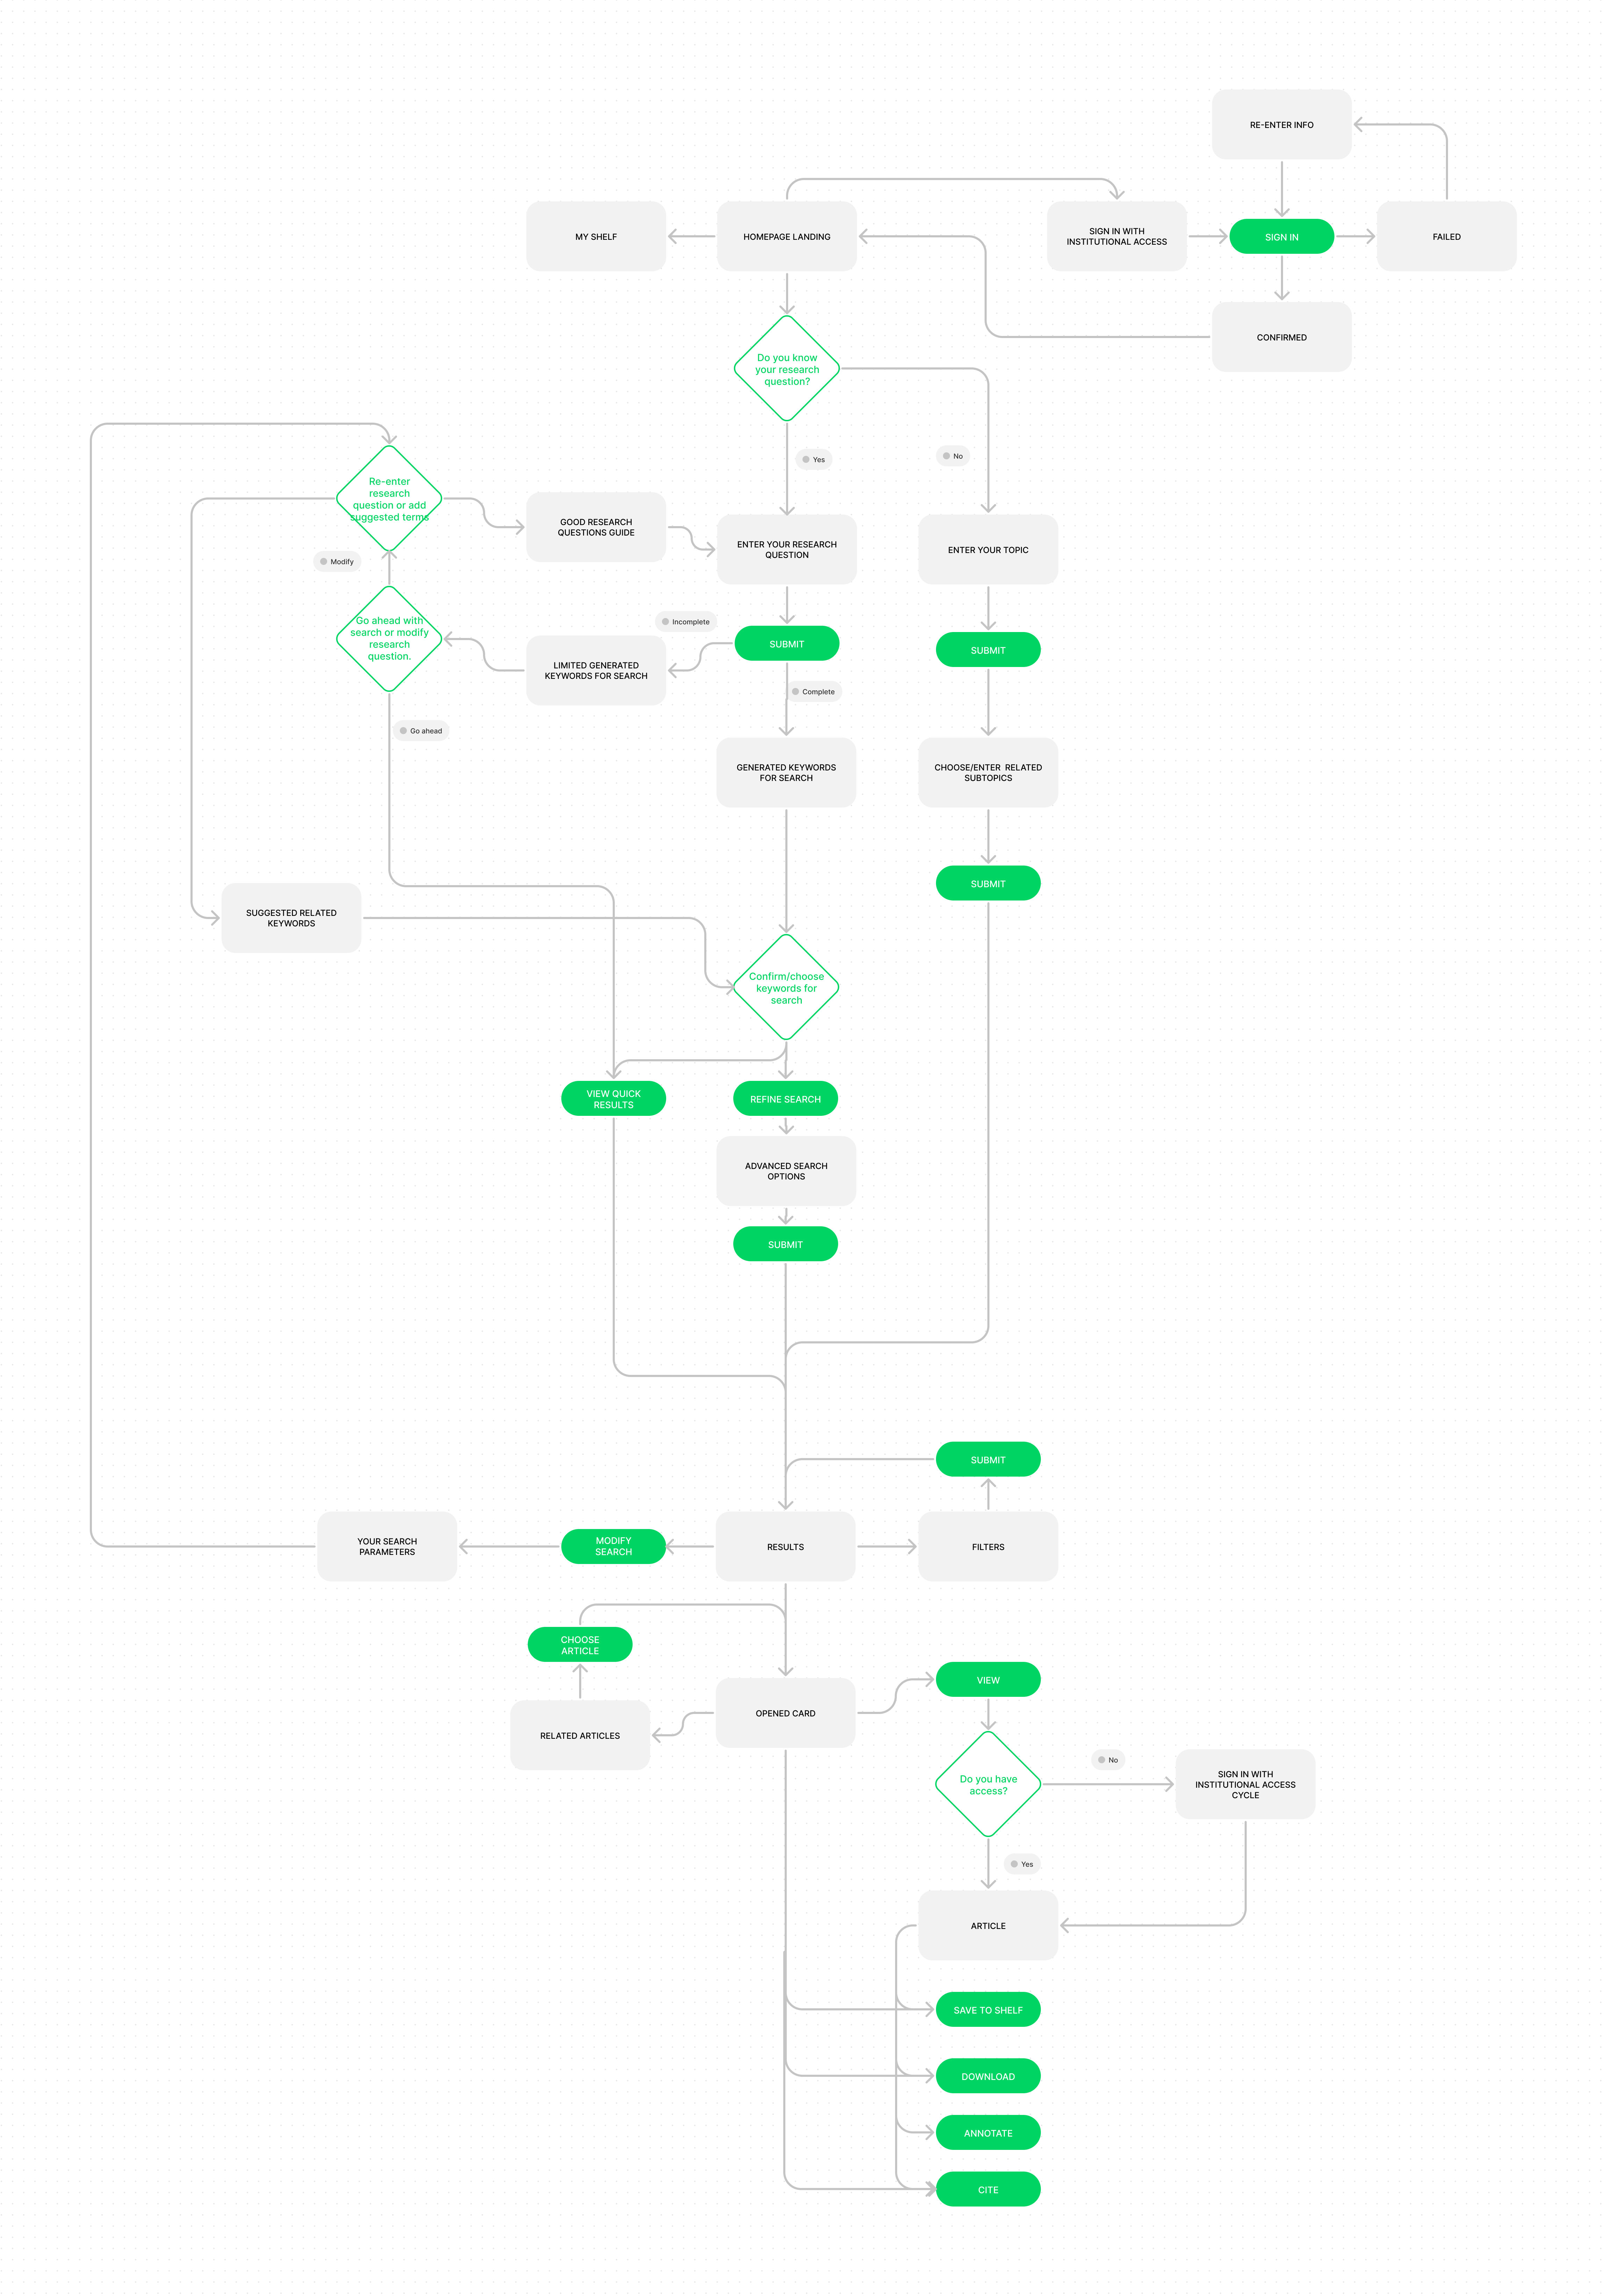 An image of my user flow